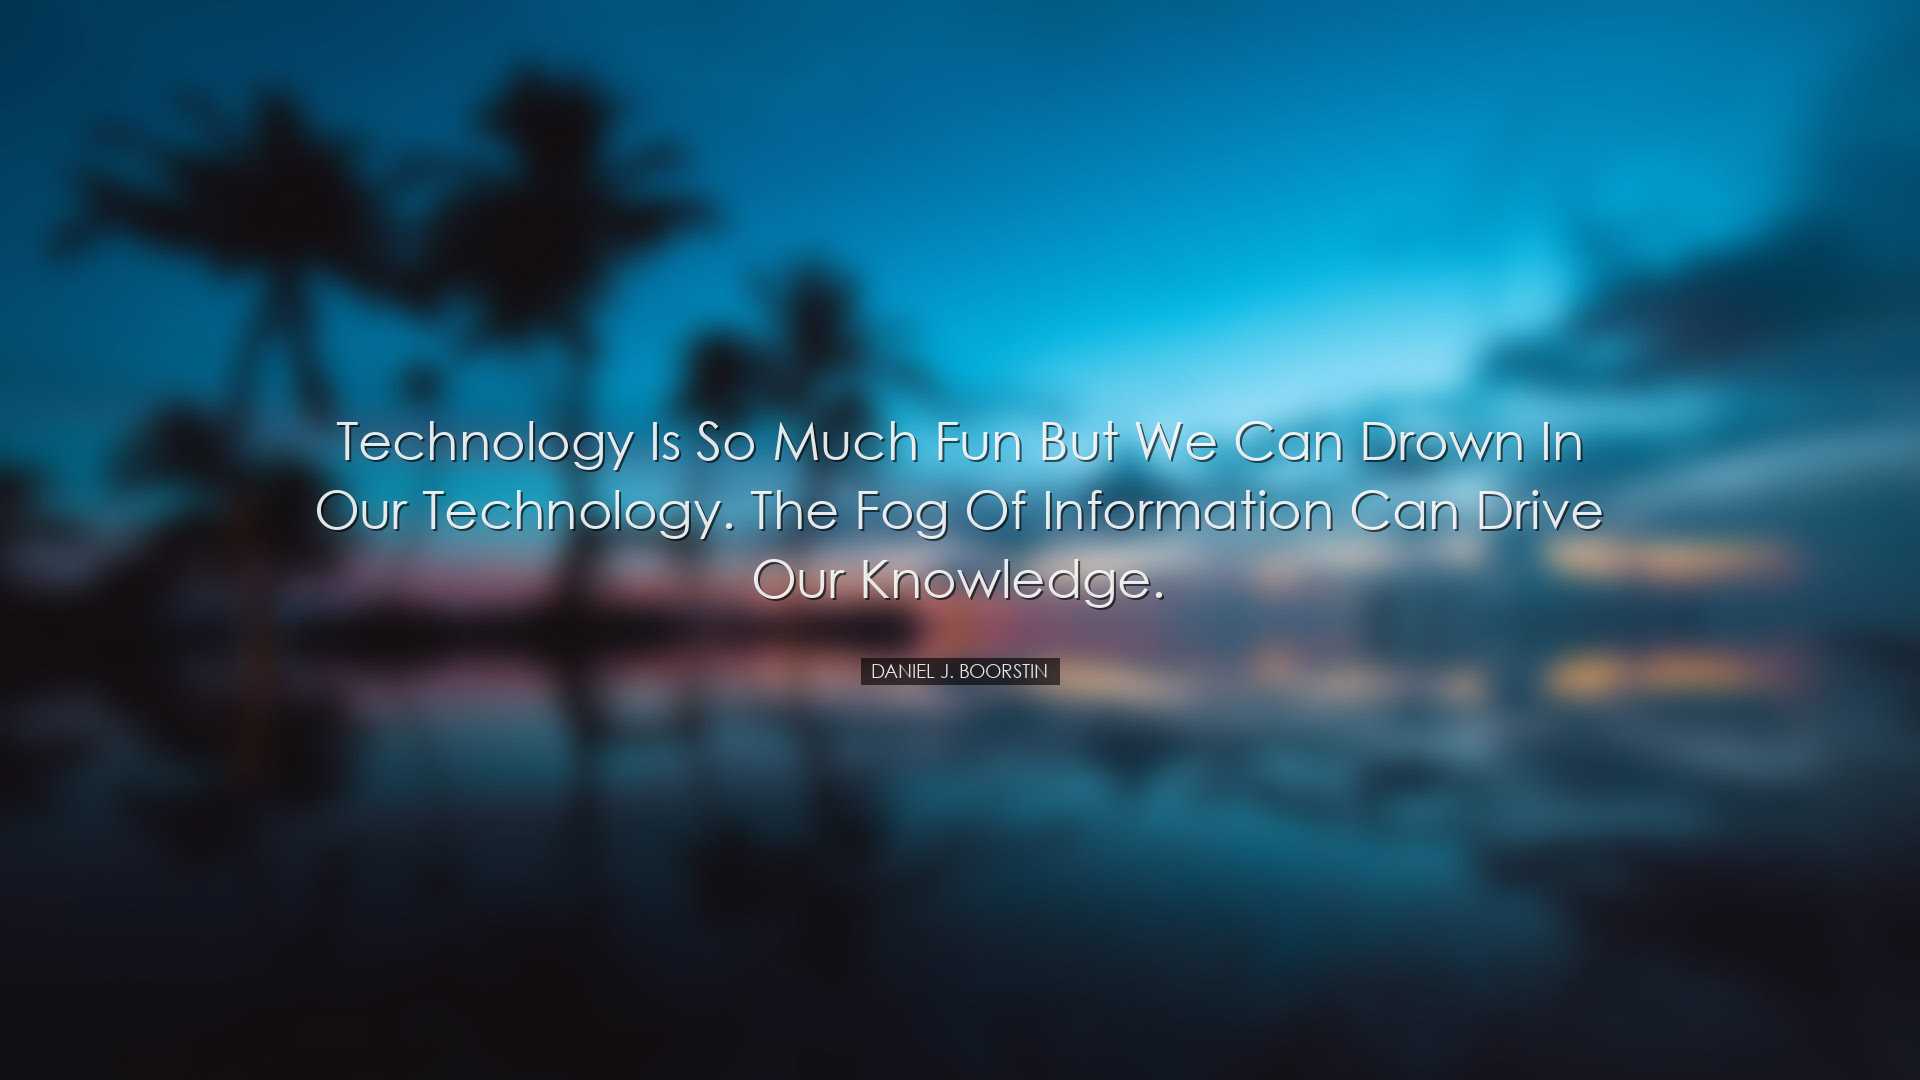 Technology is so much fun but we can drown in our technology. The